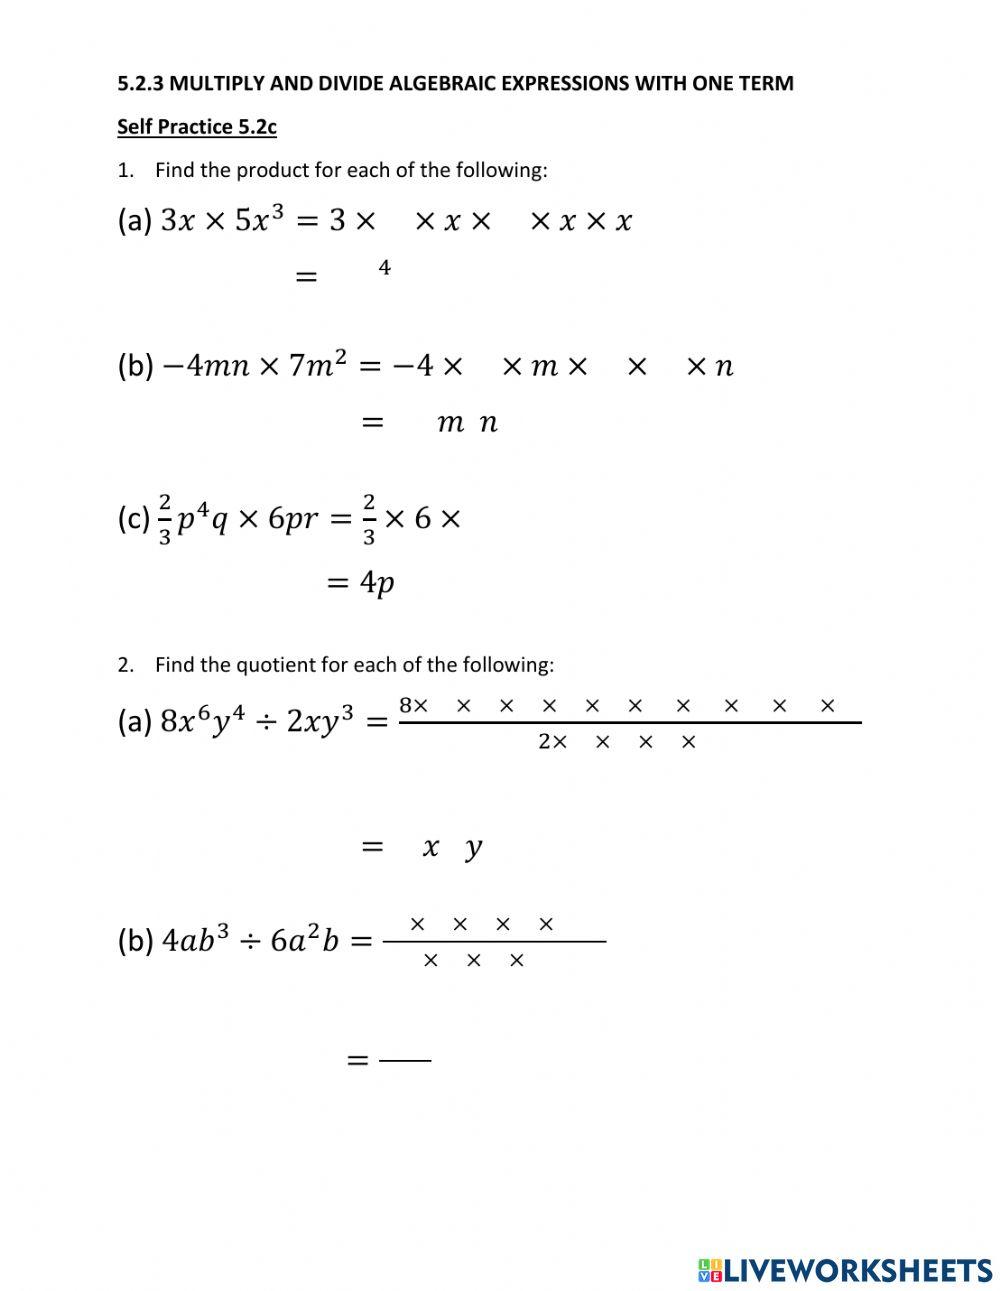 5.2.3 Multiply and Divide Algebraic Expressions with One Term